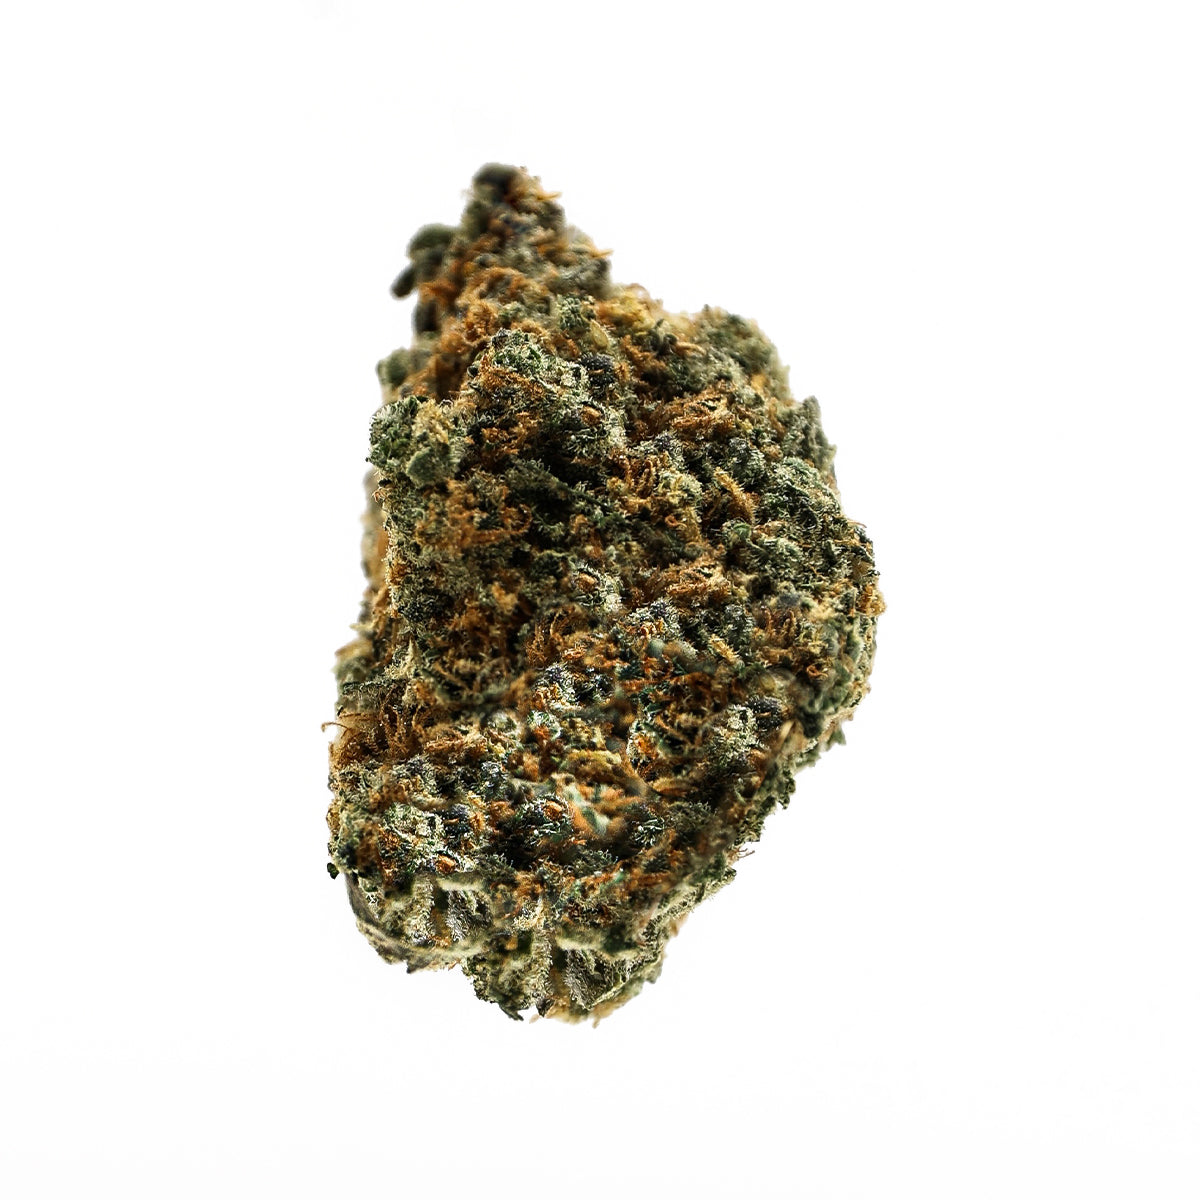 College Park THCa Sativa Premium Hemp Flower - Light green dense nugs with a tight structure and orange hairs all throughout. This sativa dominant hybrid has a very earthy, piney nose with Beta Caryophyllene as the dominant terpene. Available in 3.5g and 14g size jars.